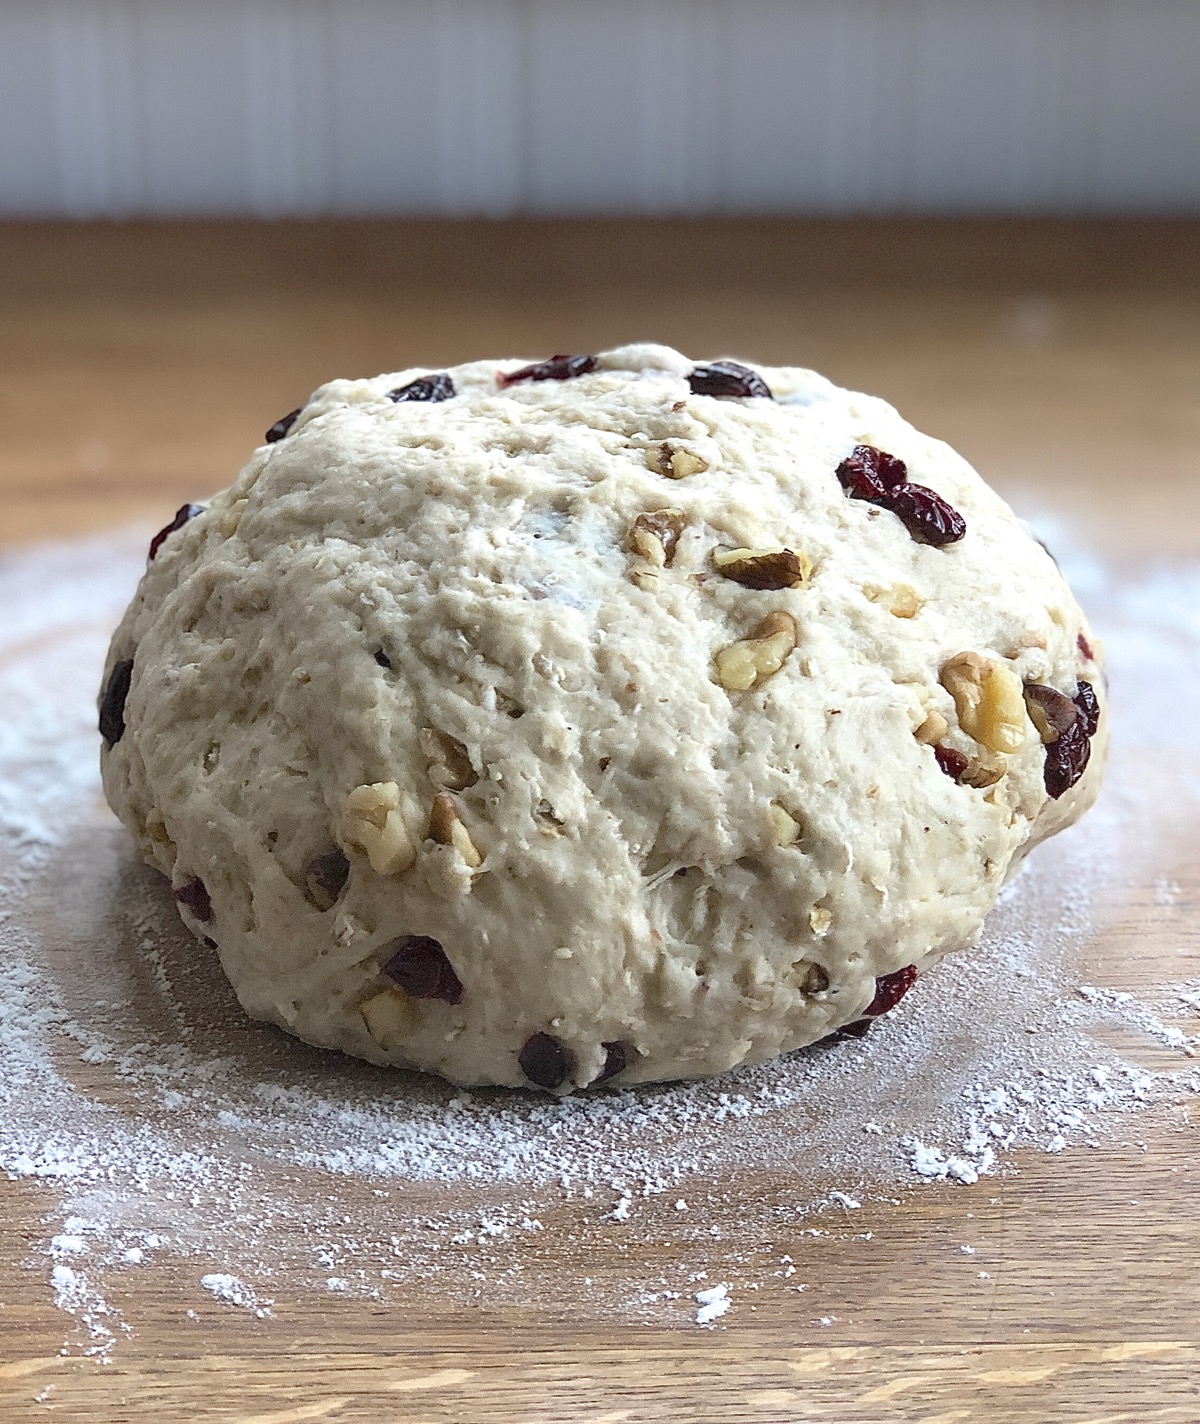 Oatmeal bread dough with dried cranberries and chopped walnuts kneaded in